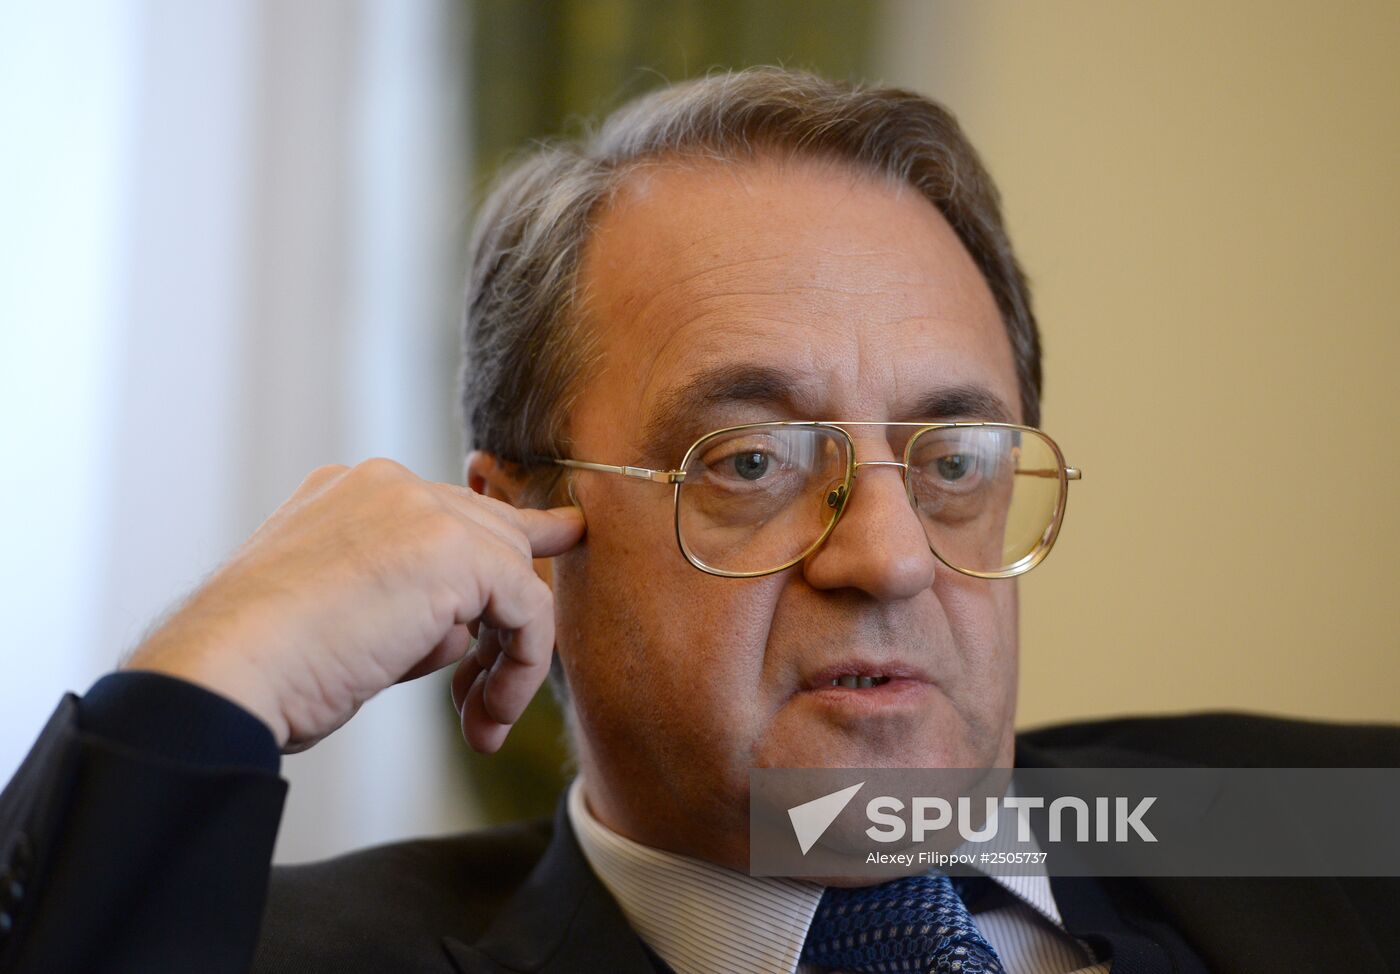 Interview with Russian Deputy Foreign Minister Mikhail Bogdanov